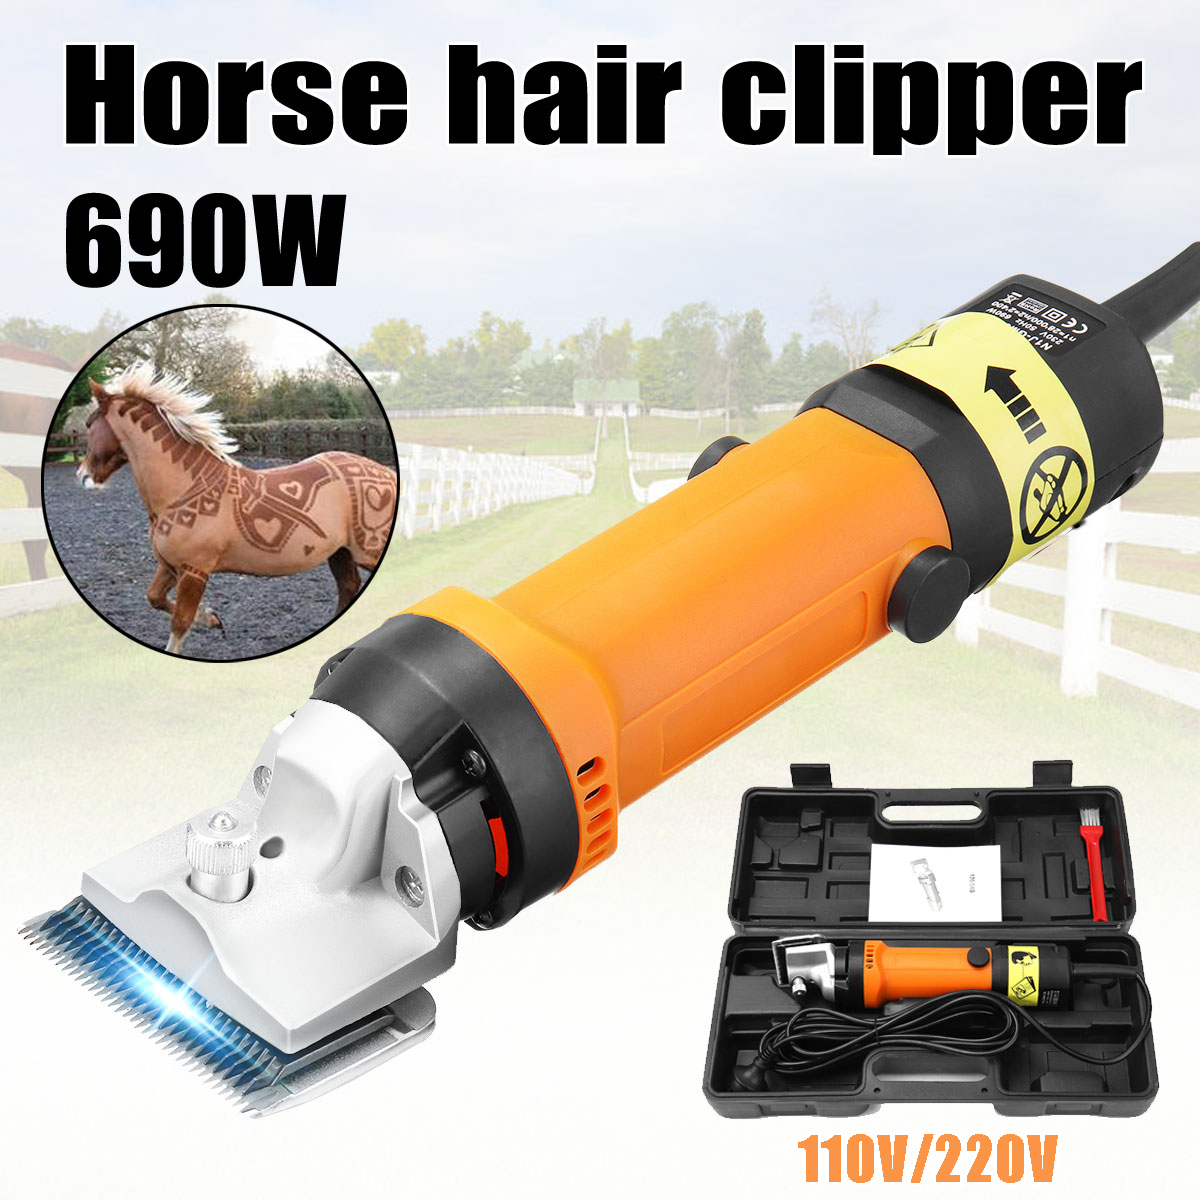 690W-Professional-Electric-Animal-Hair-Clipper-Heavy-Duty-Horse-Dog-Pet-Shearing-1337123